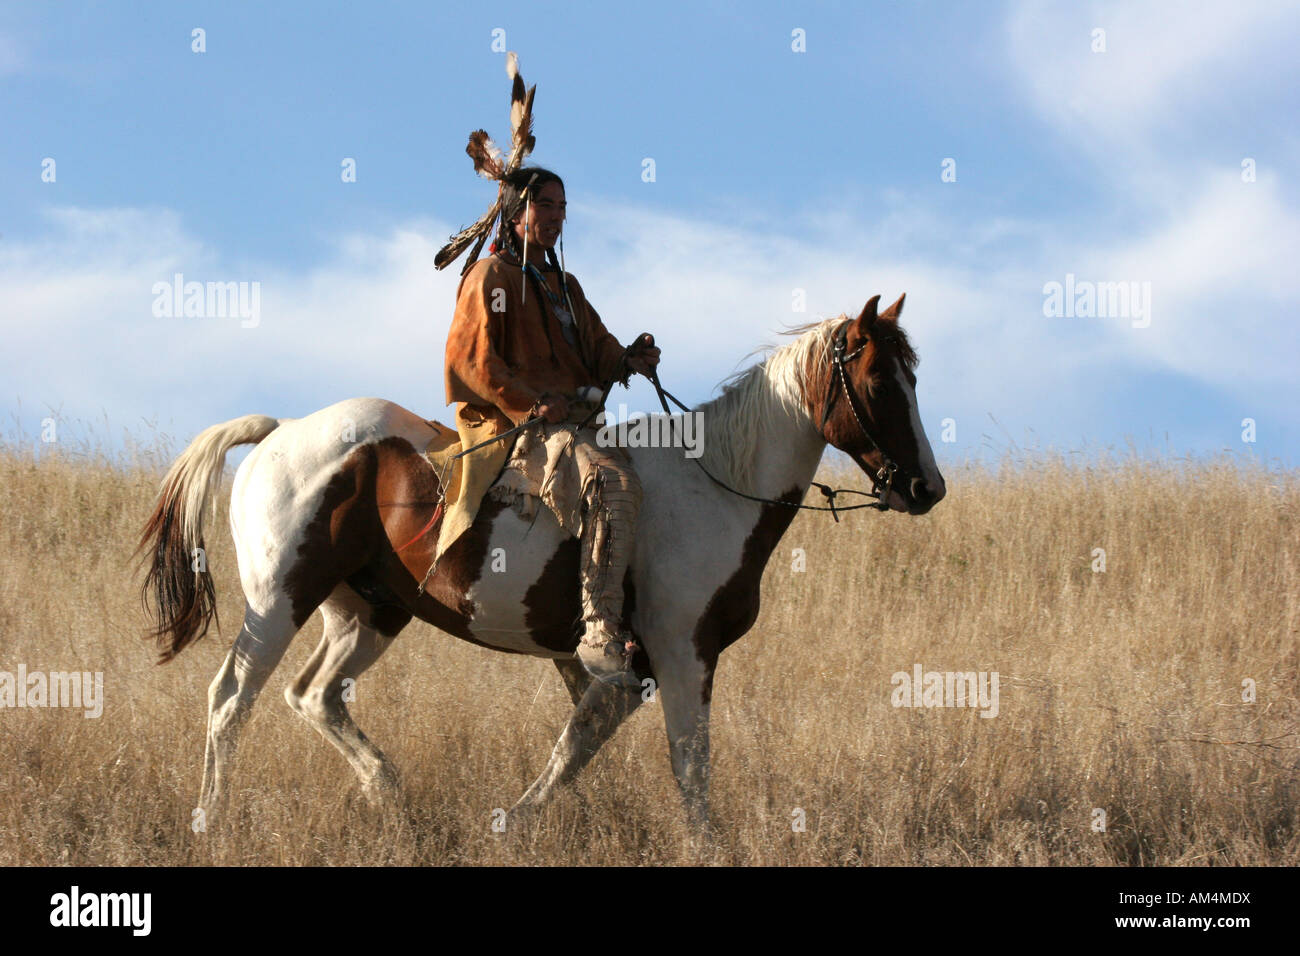 A Native American Indian man on horseback riding the prairie of South ...